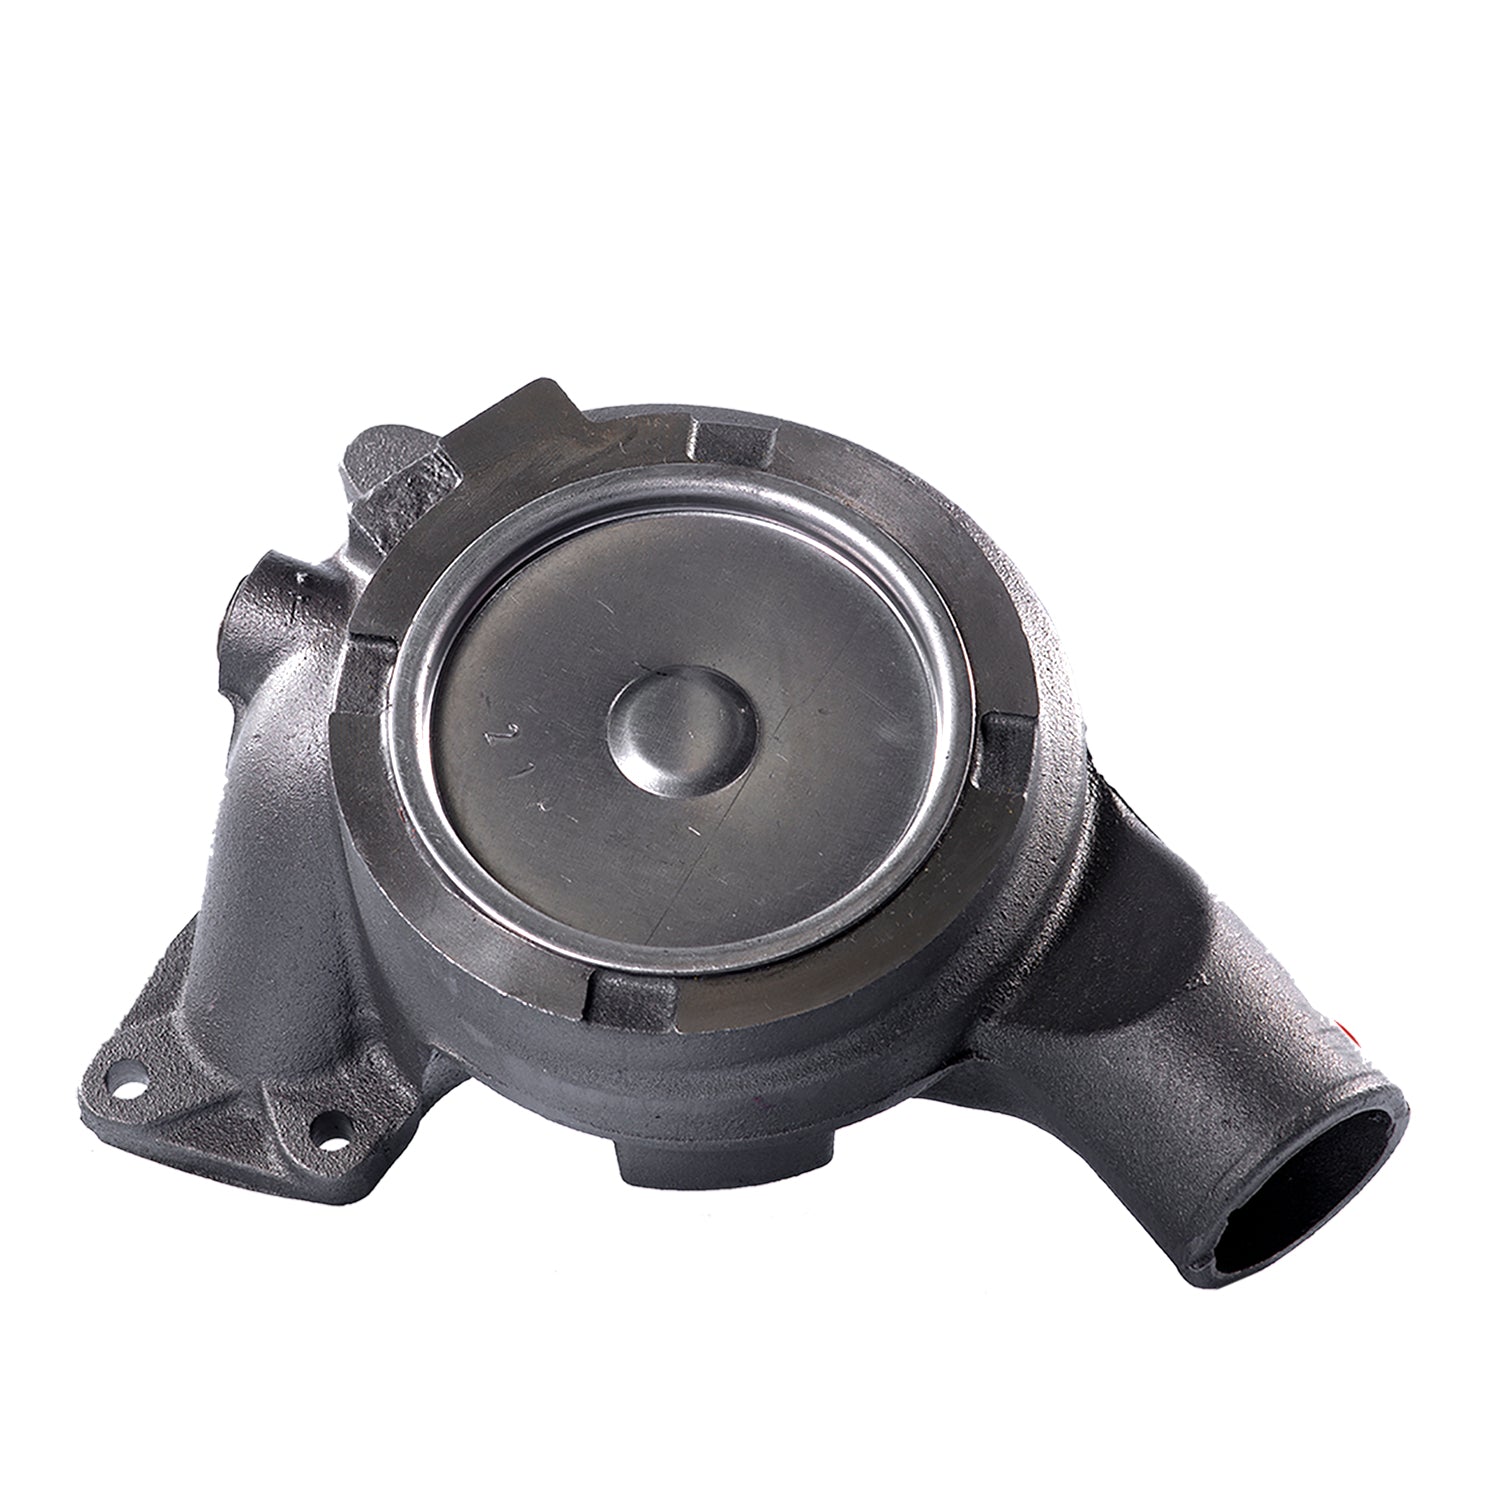 Water Pump Replacement for Perkins; 1004.4 / 1006.6 U5MW0157, 022/01630